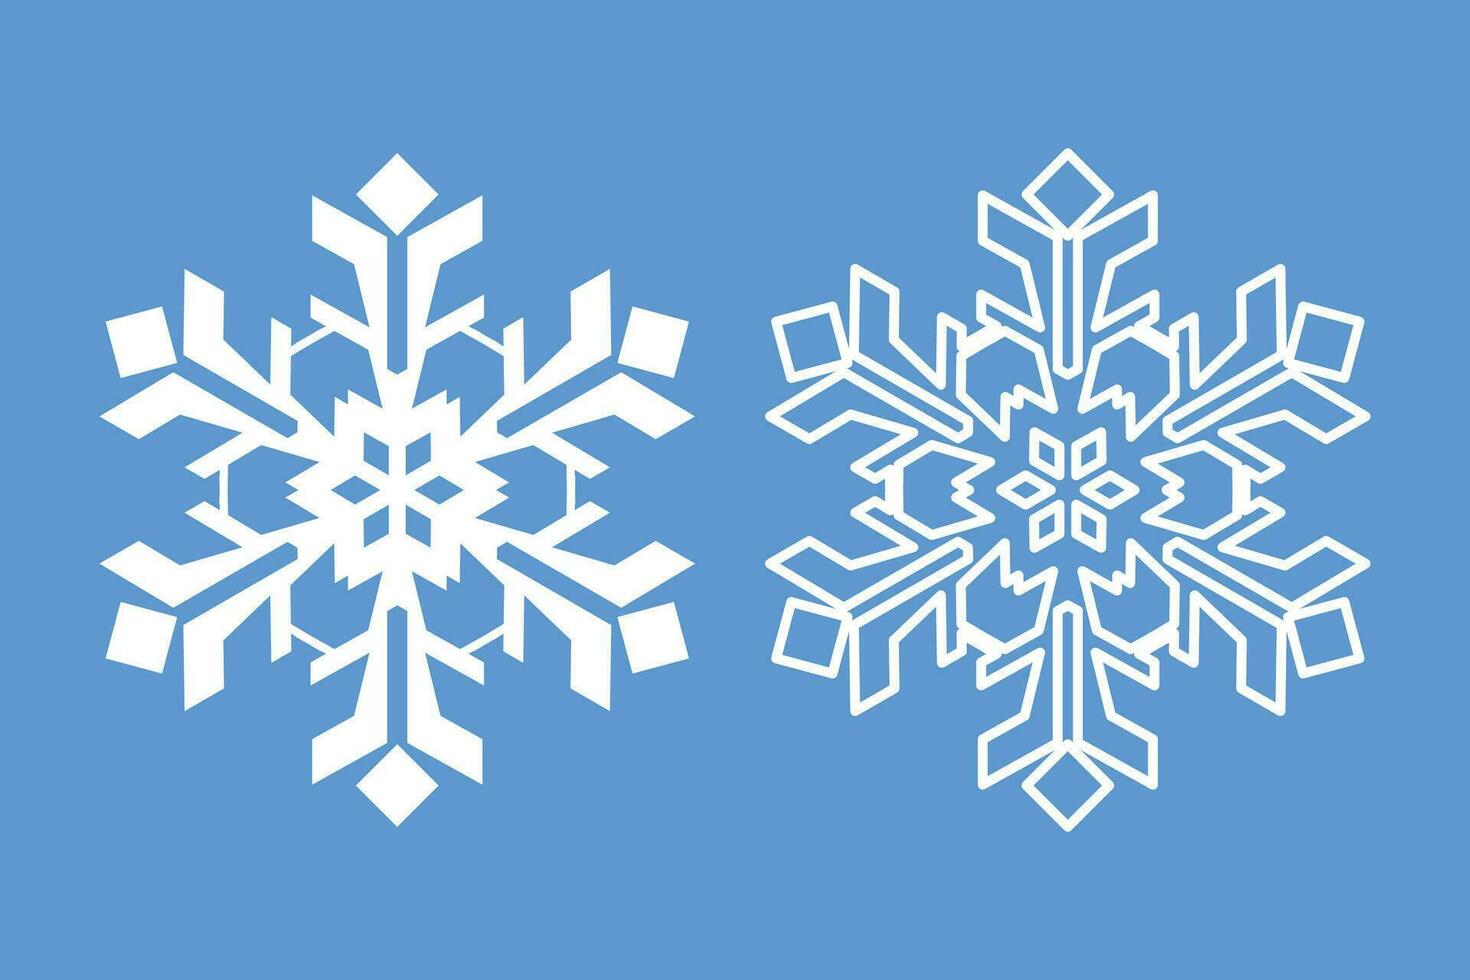 crystal snowflake element set isolated icon outline design winter holiday vector illustration